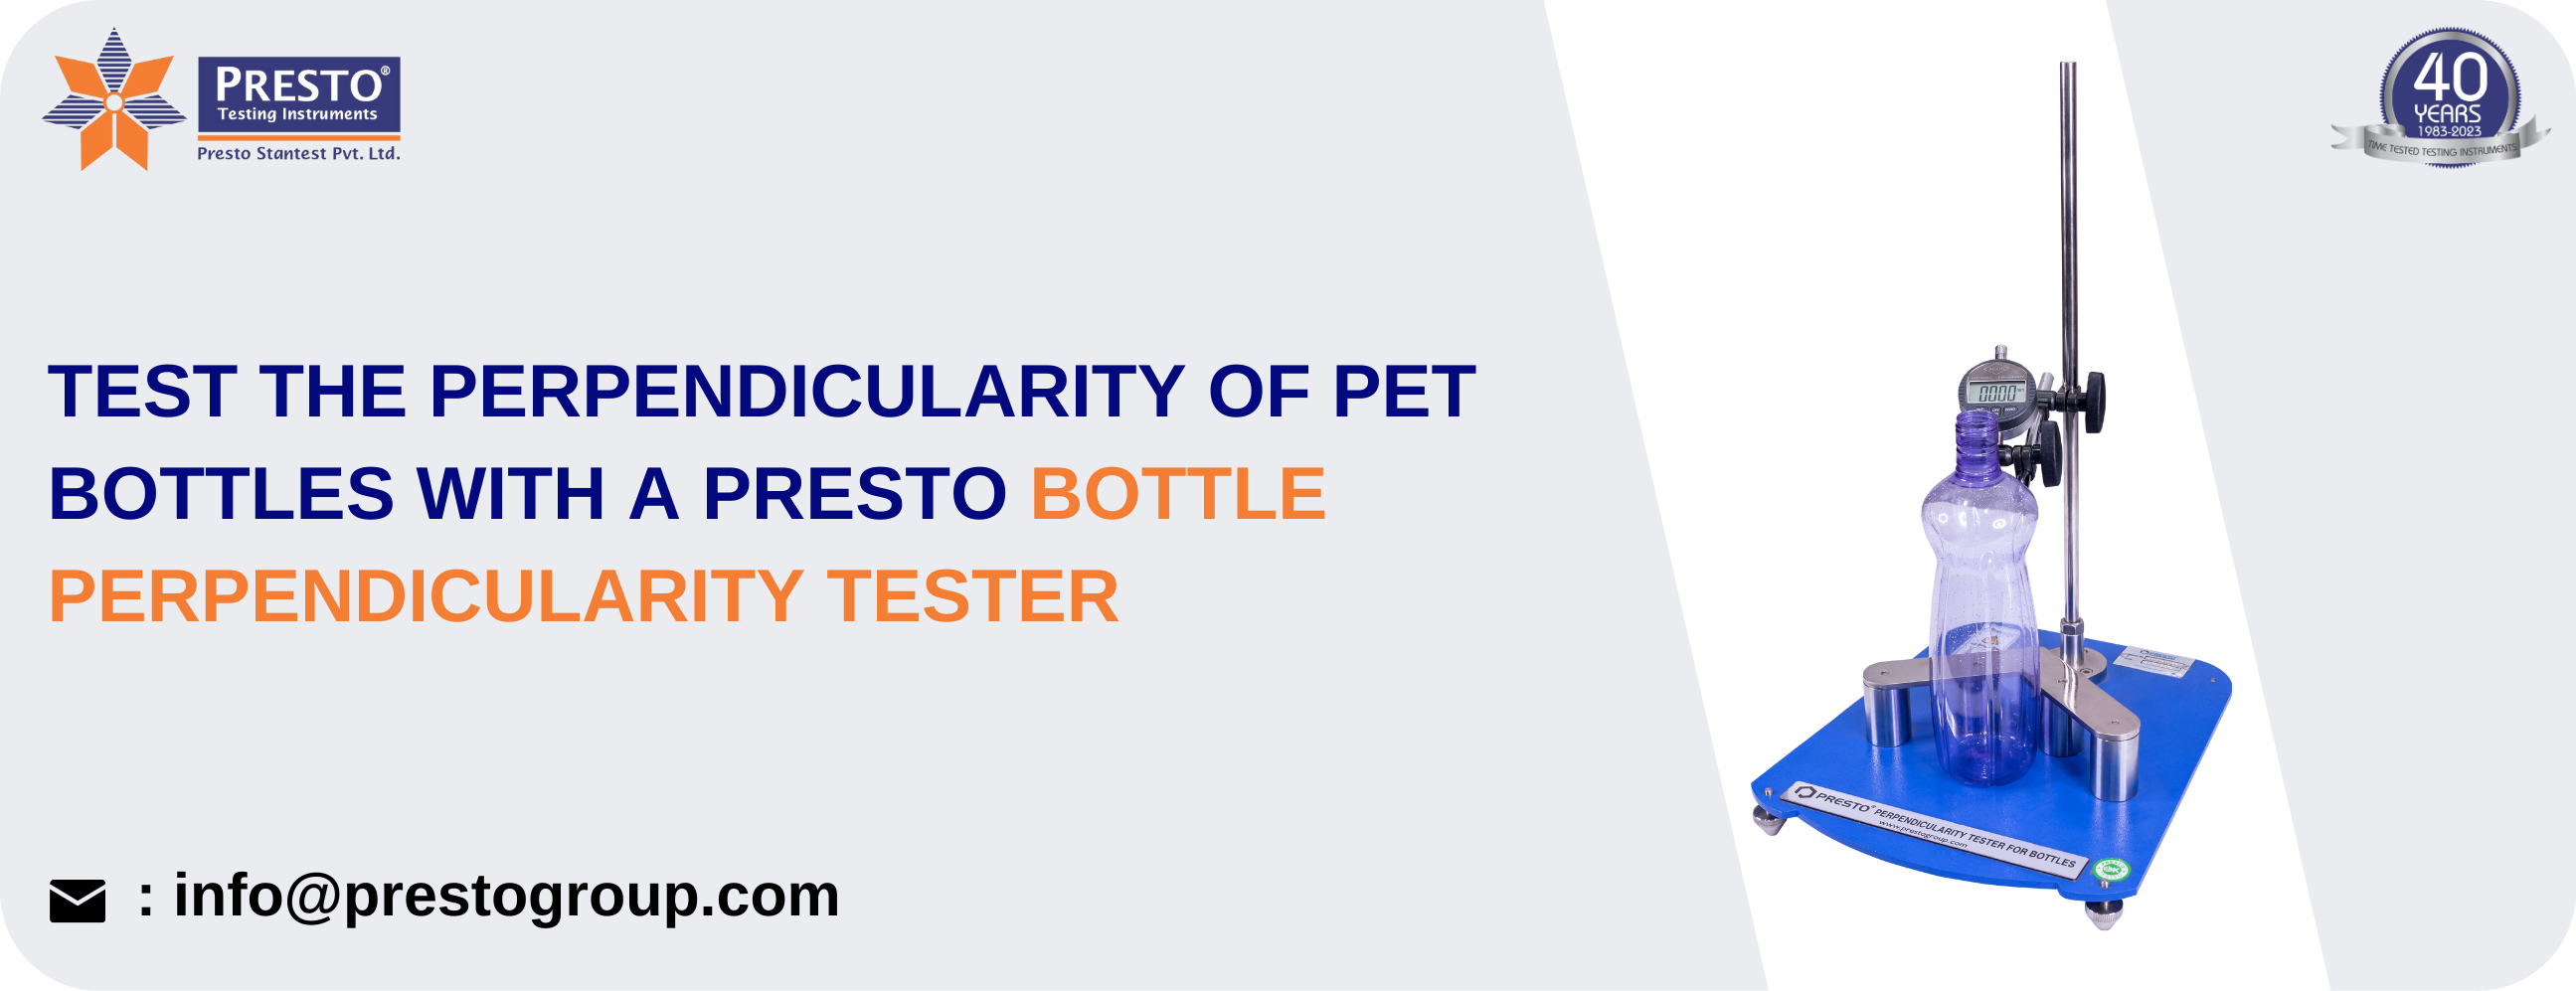 Test the perpendicularity of PET bottles with a Presto bottle perpendicularity tester